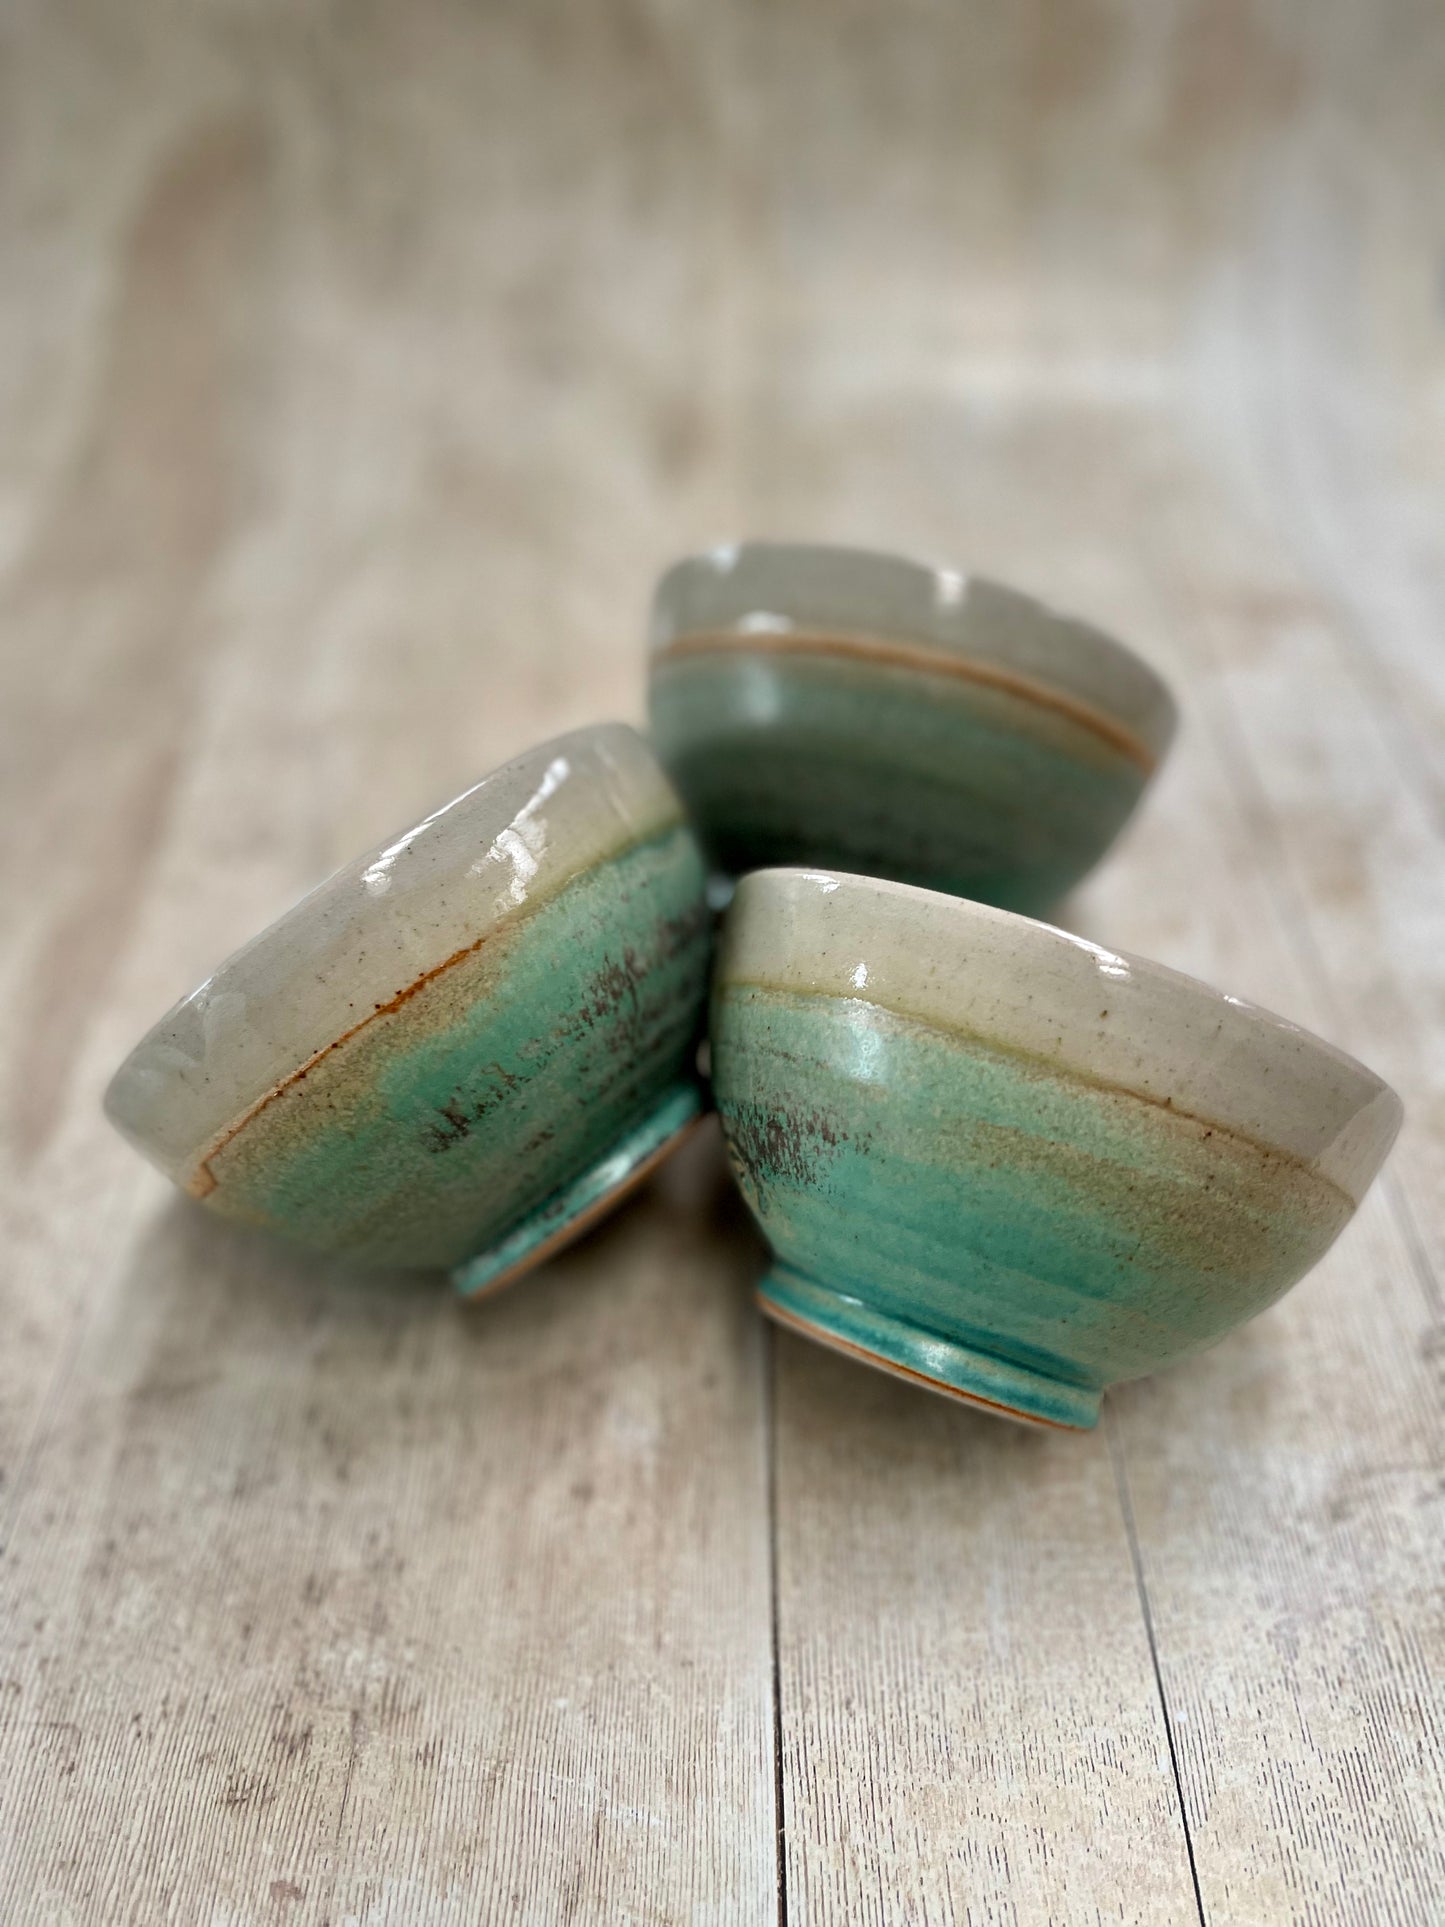 Cereal Bowl (Signature Collection)